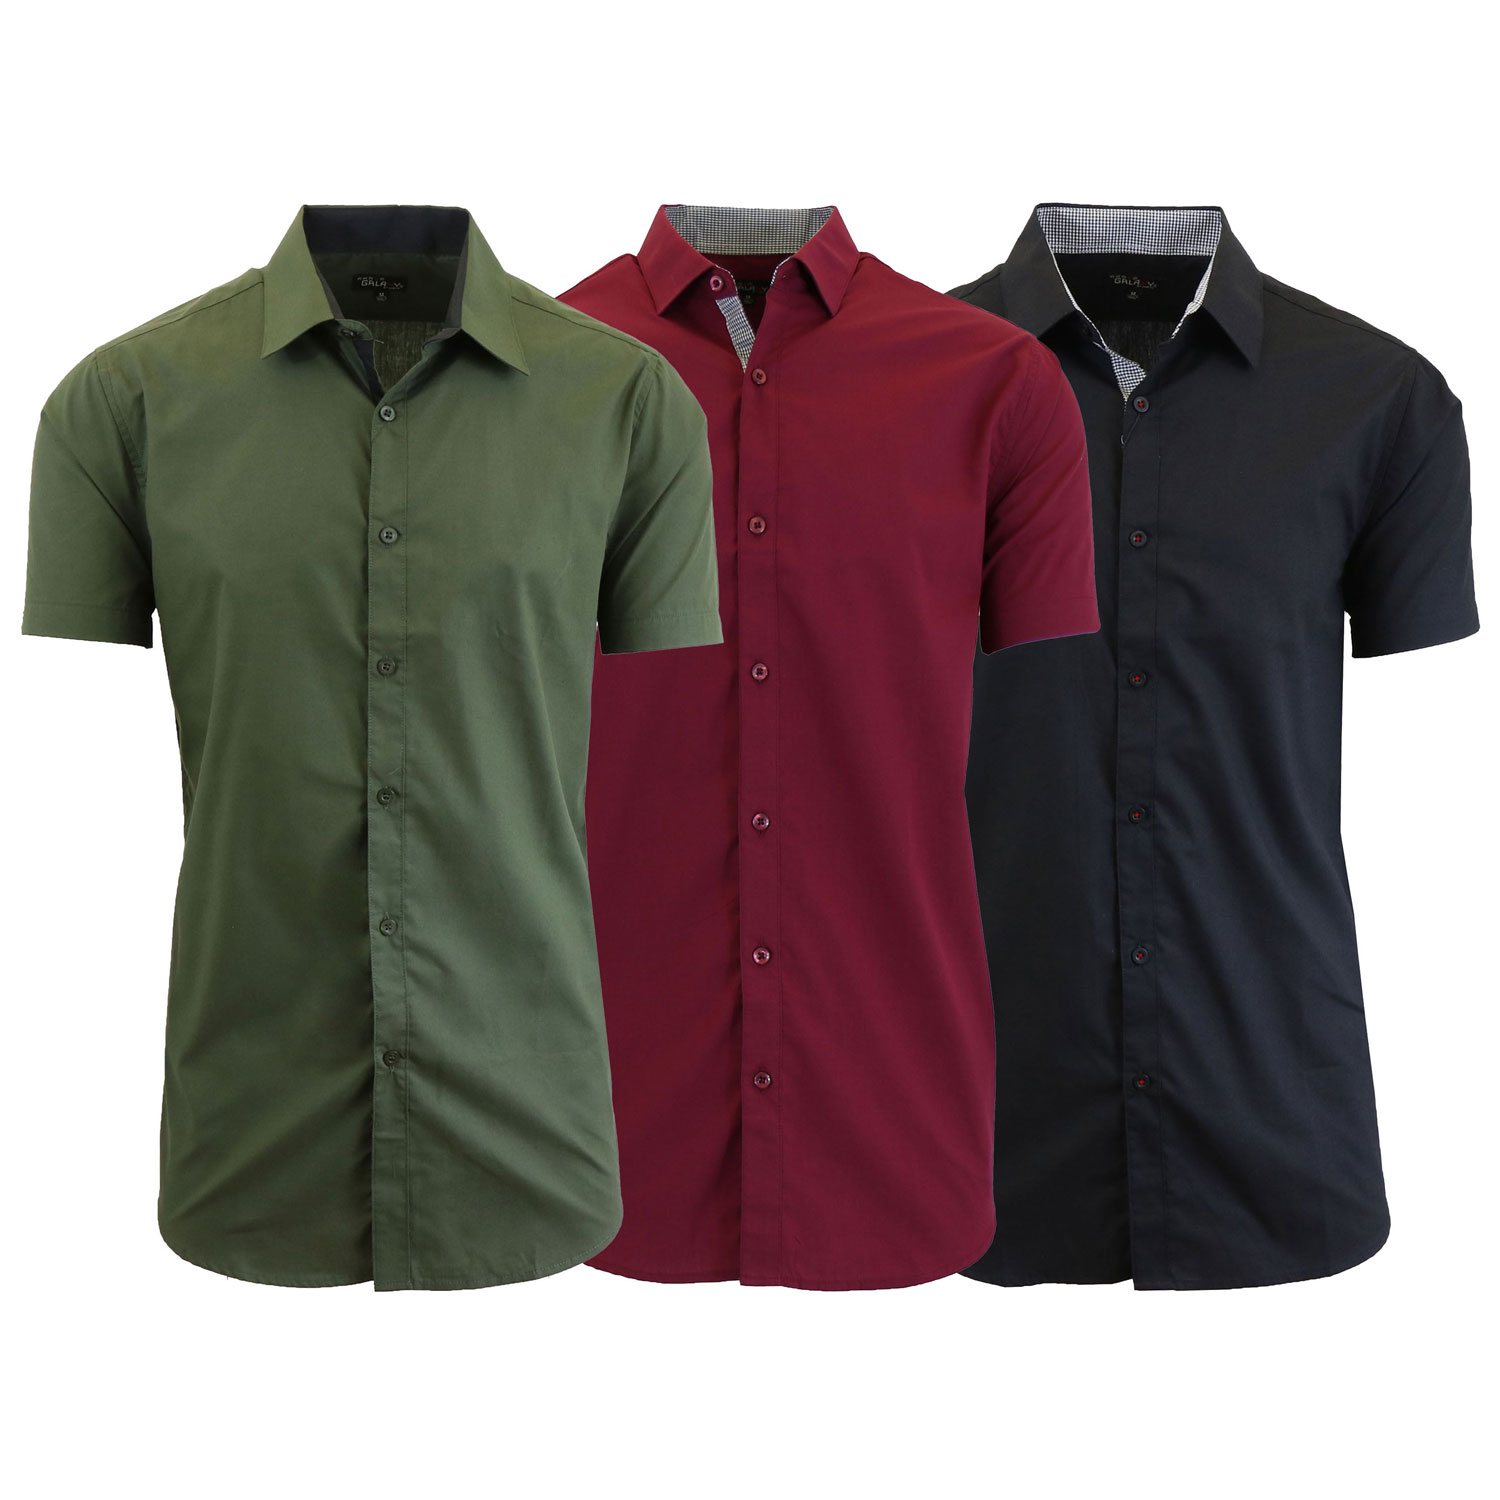 3 Pack Men's Slim Fit Short Sleeve Dress Shirts for $27.19 + Free Shipping